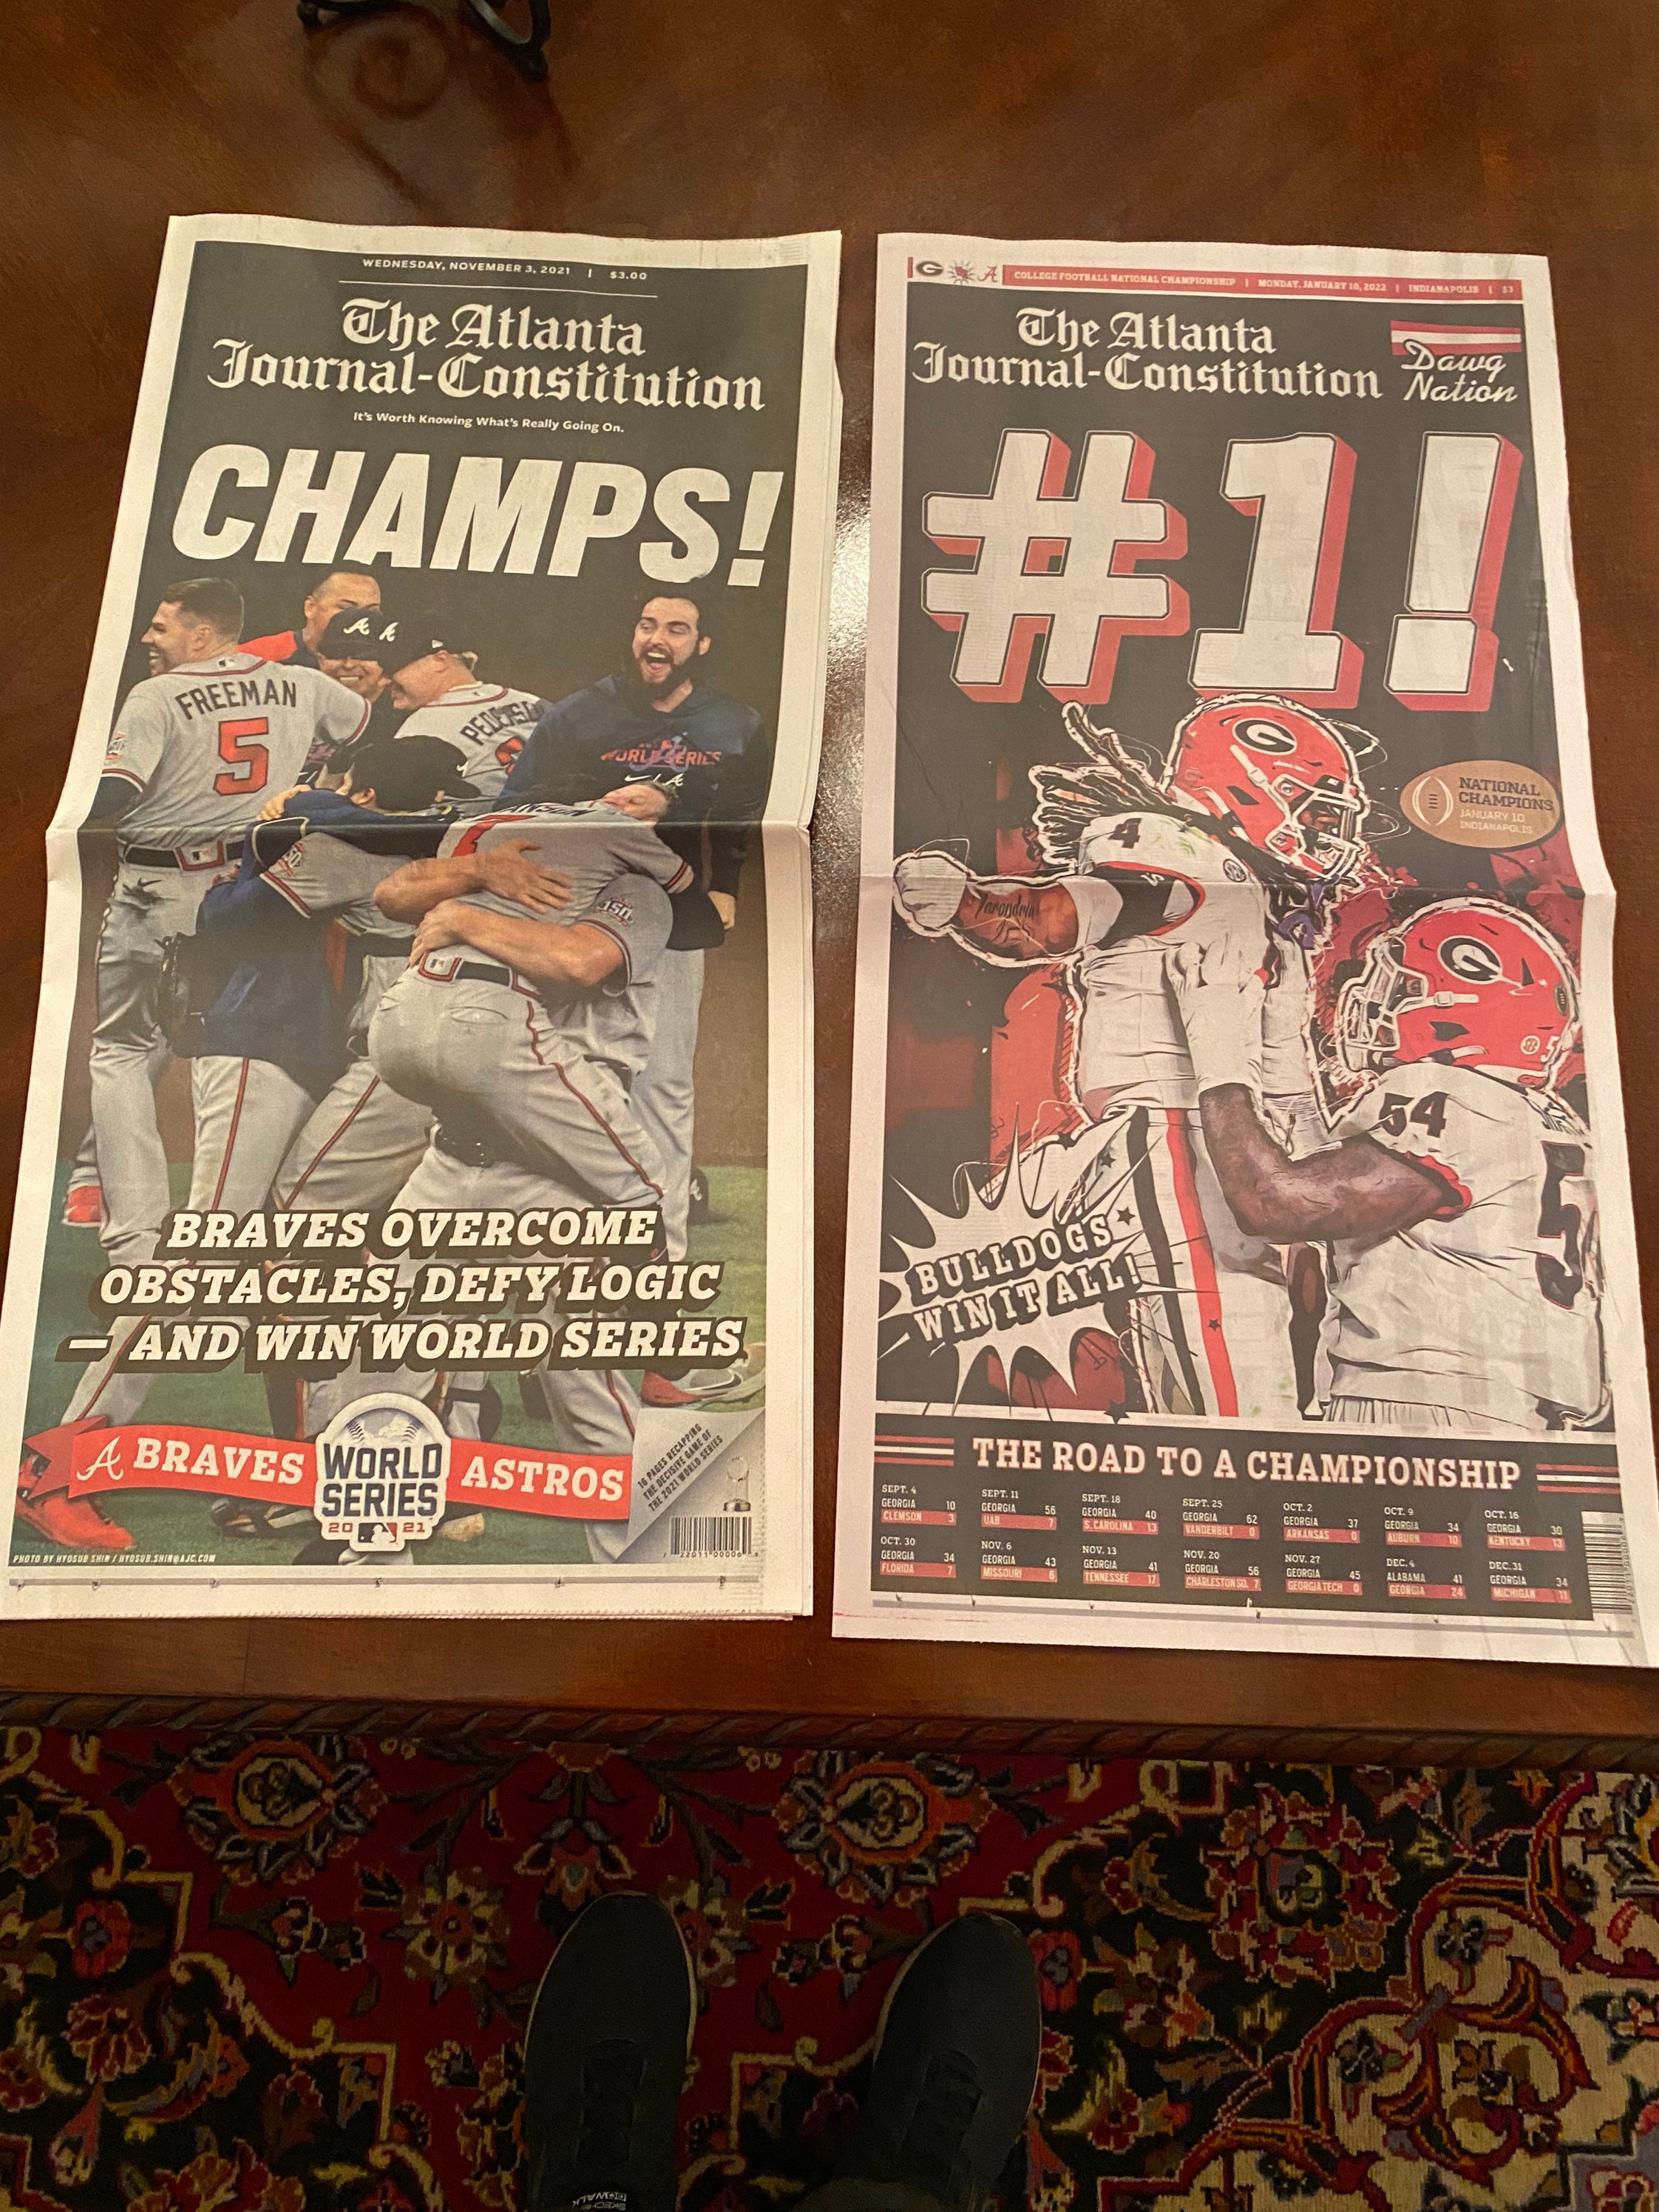 Georgia football national champions will be recognized at Braves game